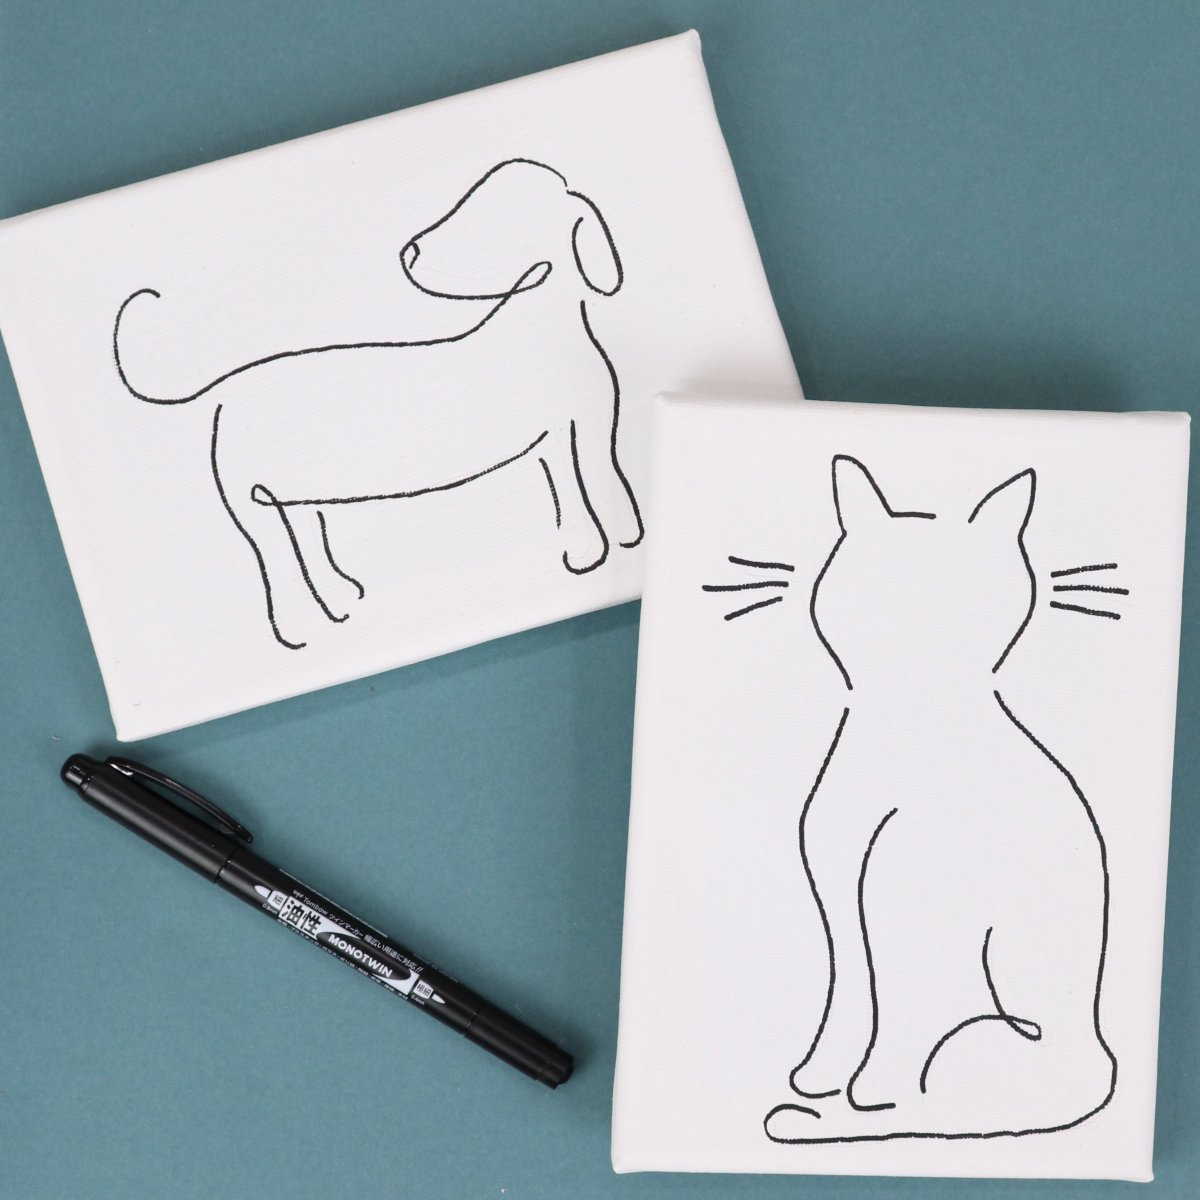 Image contains two white canvases; one with a minimalist line drawing of a dog on it, and the other with a line drawing of a cat. They sit on a teal background with a black marker nearby.